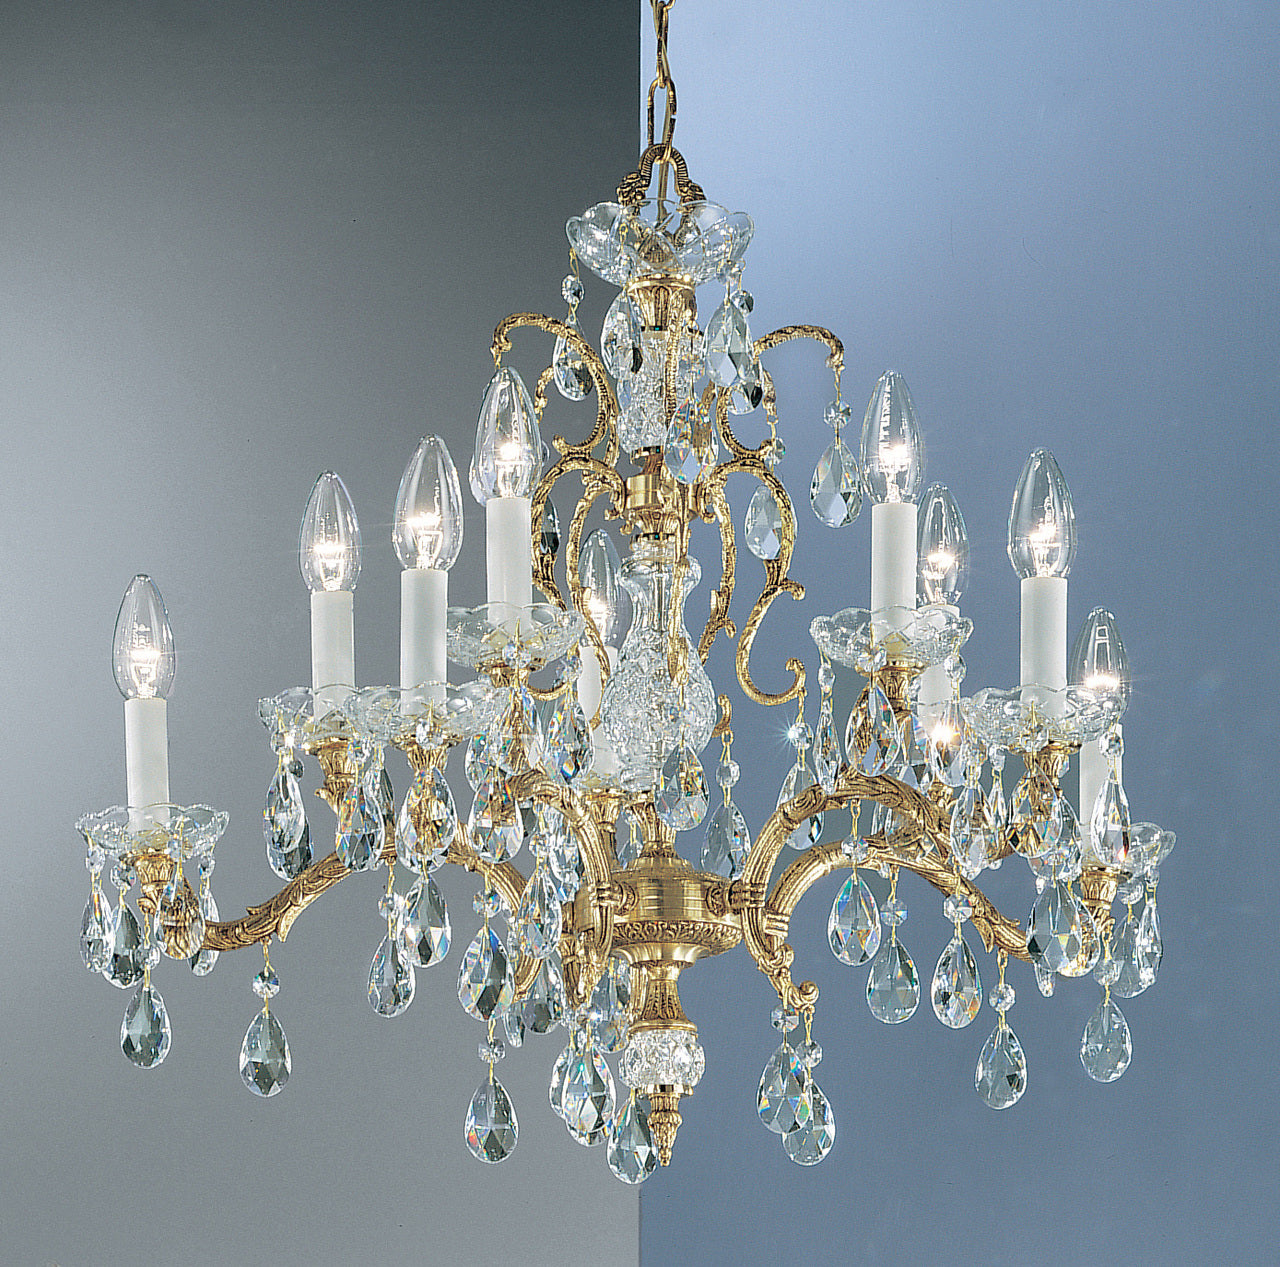 Classic Lighting 5530 OWB SC Madrid Crystal/Cast Brass Chandelier in Olde World Bronze (Imported from Spain)